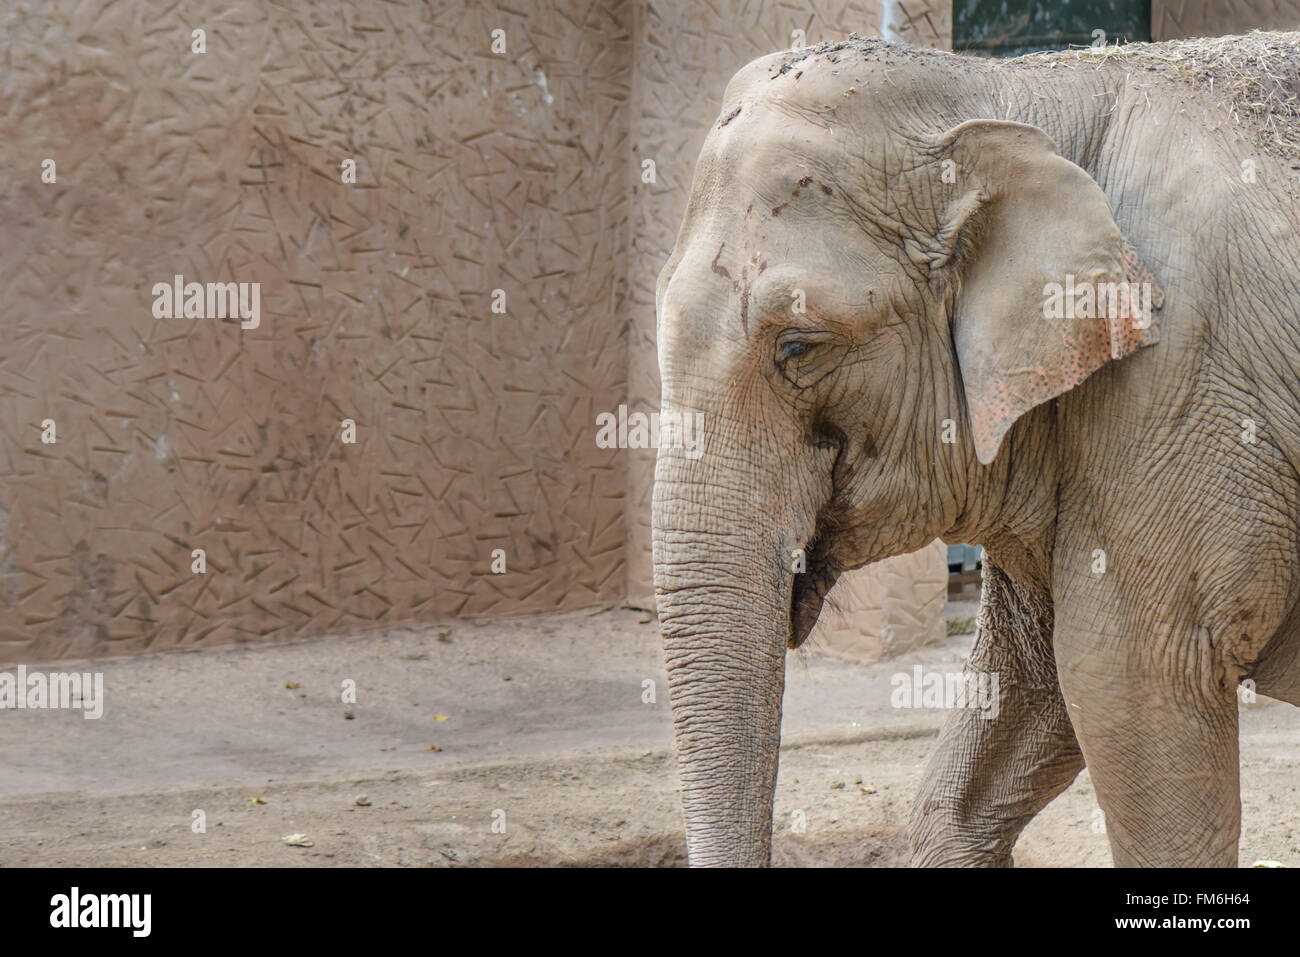 A big elephant eating and resting Stock Photo